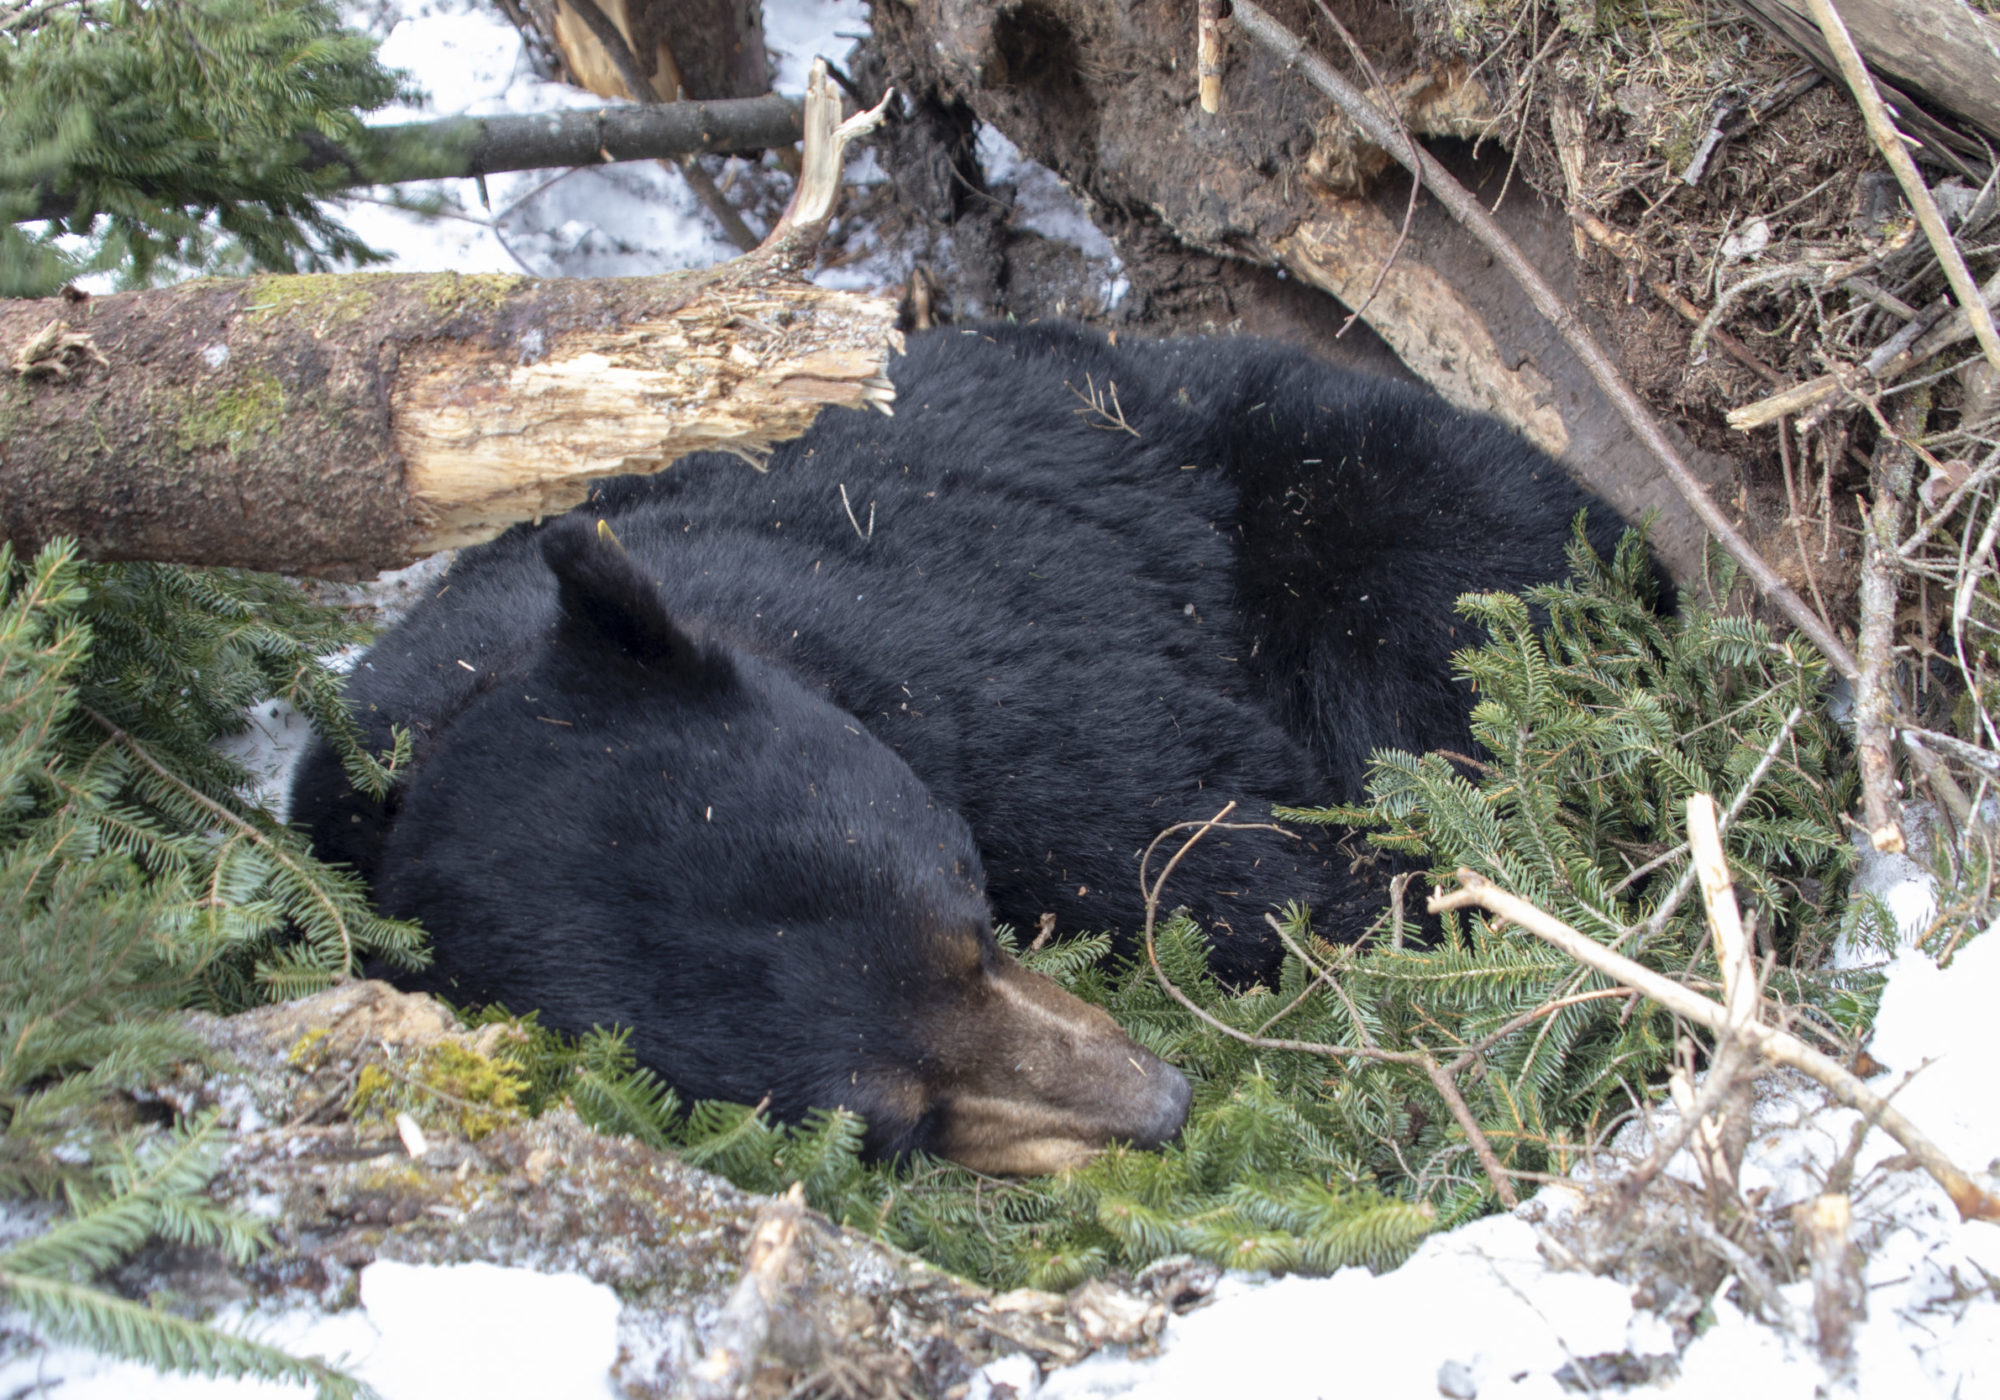 Stark, a radio collared male bear, rests on his bed of balsam fir in his den after being checked by biologists. Soon after this image was taken, they covered his den back over with the logs, sticks, and snow to let him rest for the remainder of winter.  © K.P. McFarland